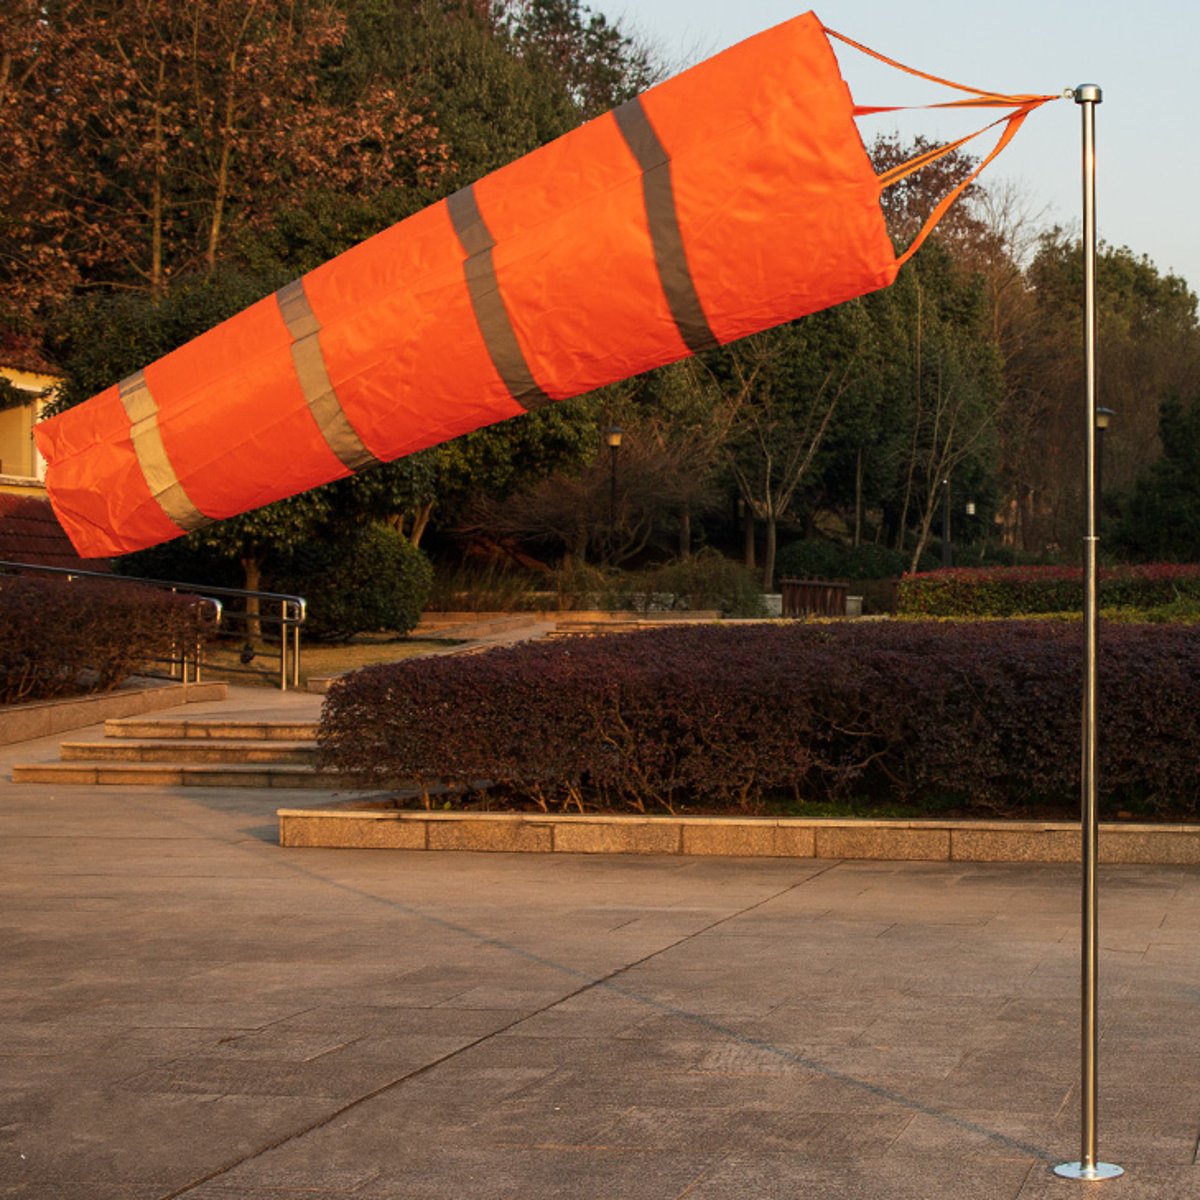 Reflective-Tape-Outdoor-Windsocks-Bag-Weather-Station-Flag-Belt-for-Airport-Garden-Patio-Lawn-Safety-1573310-10